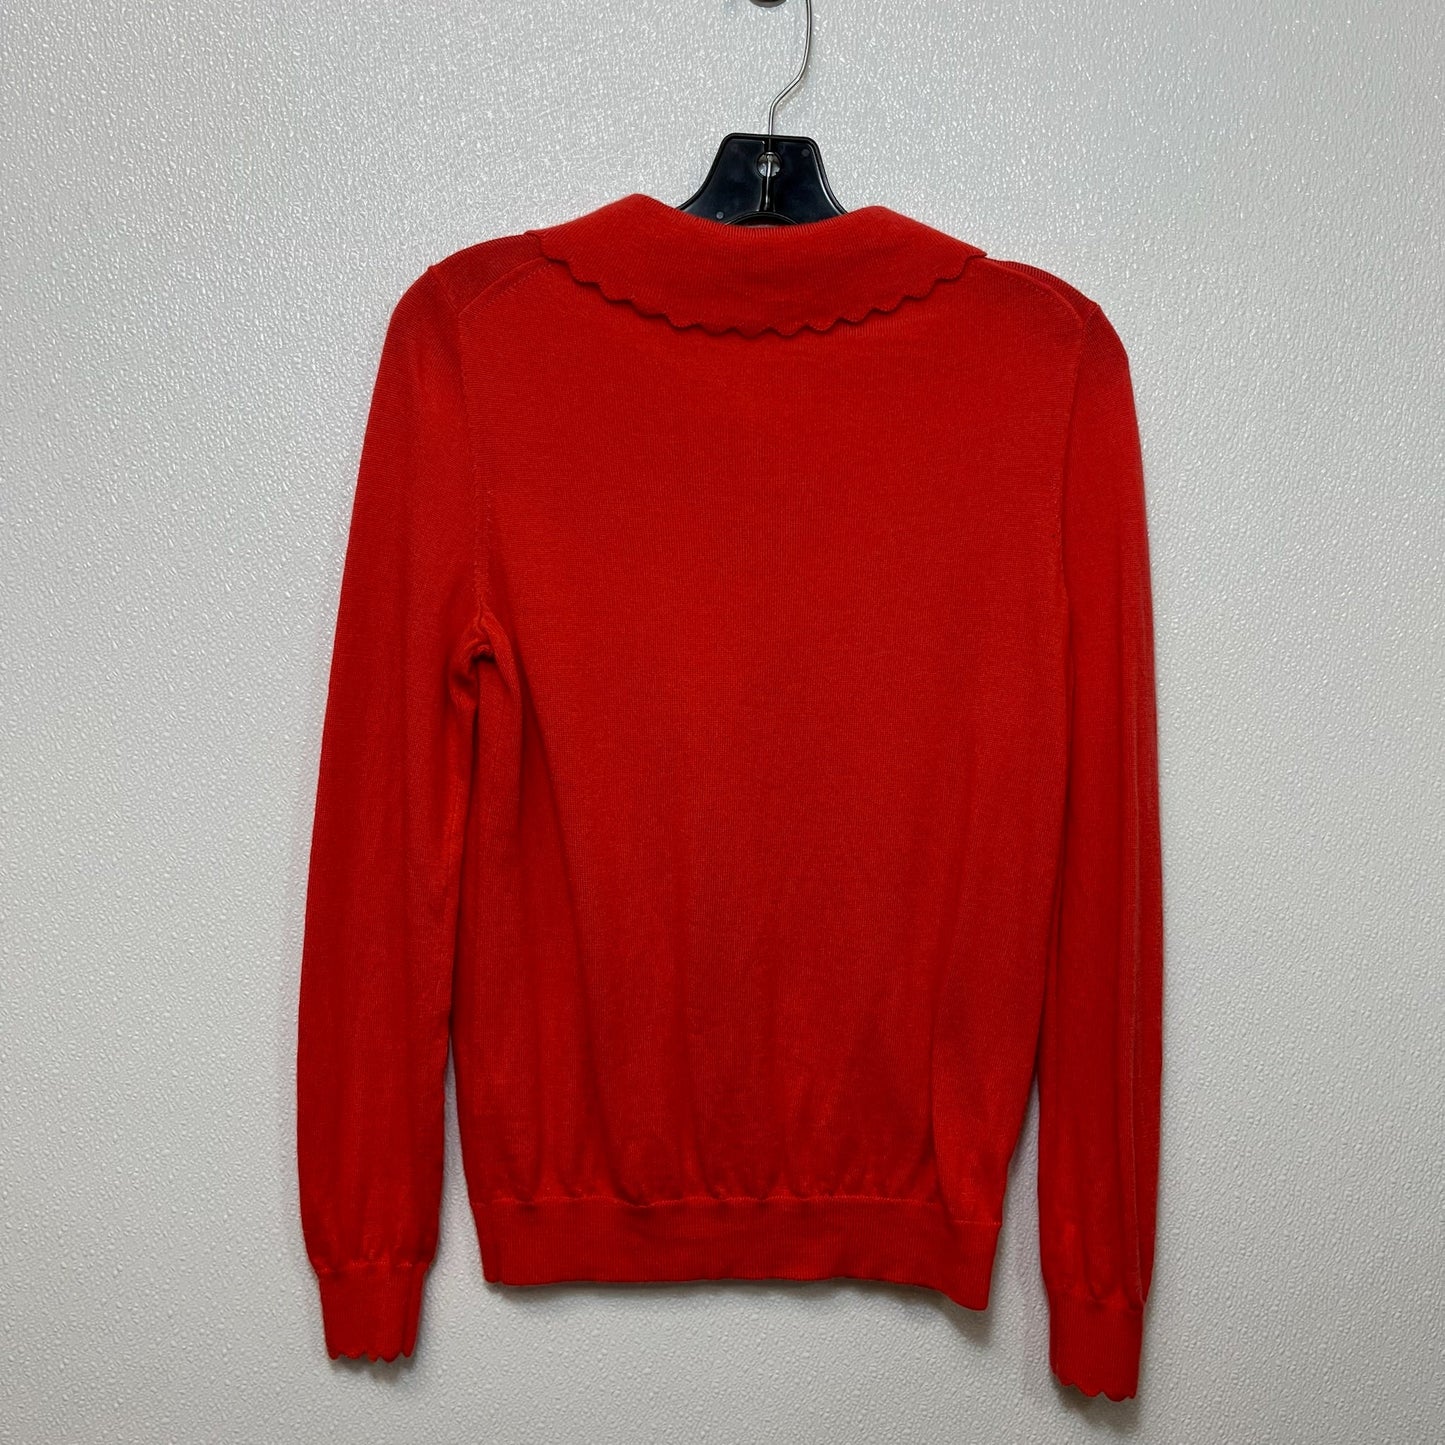 Sweater By Boden  Size: M